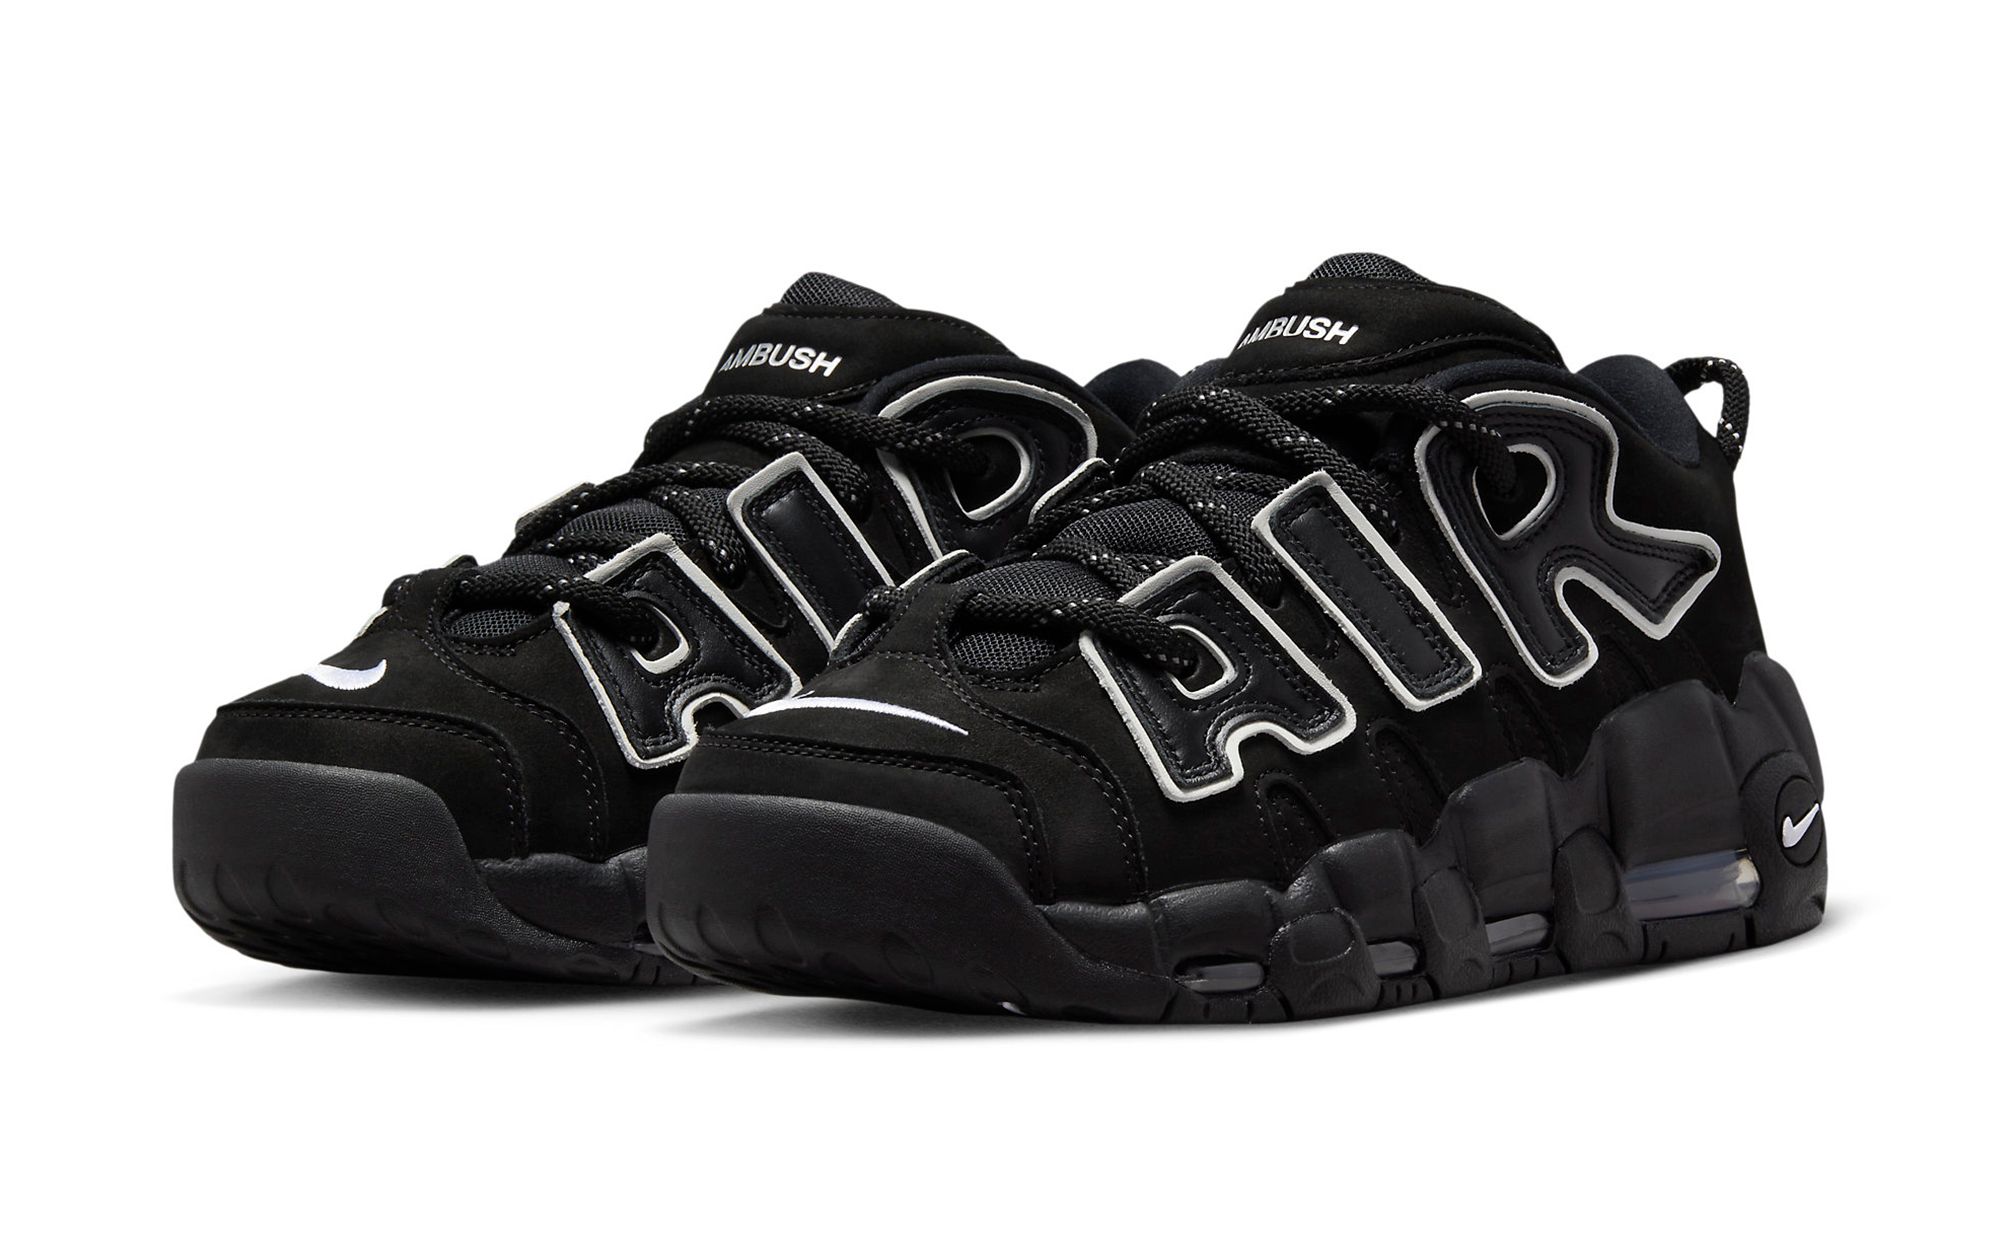 AMBUSH x Nike Air More Uptempo Low Lilac - Release Date